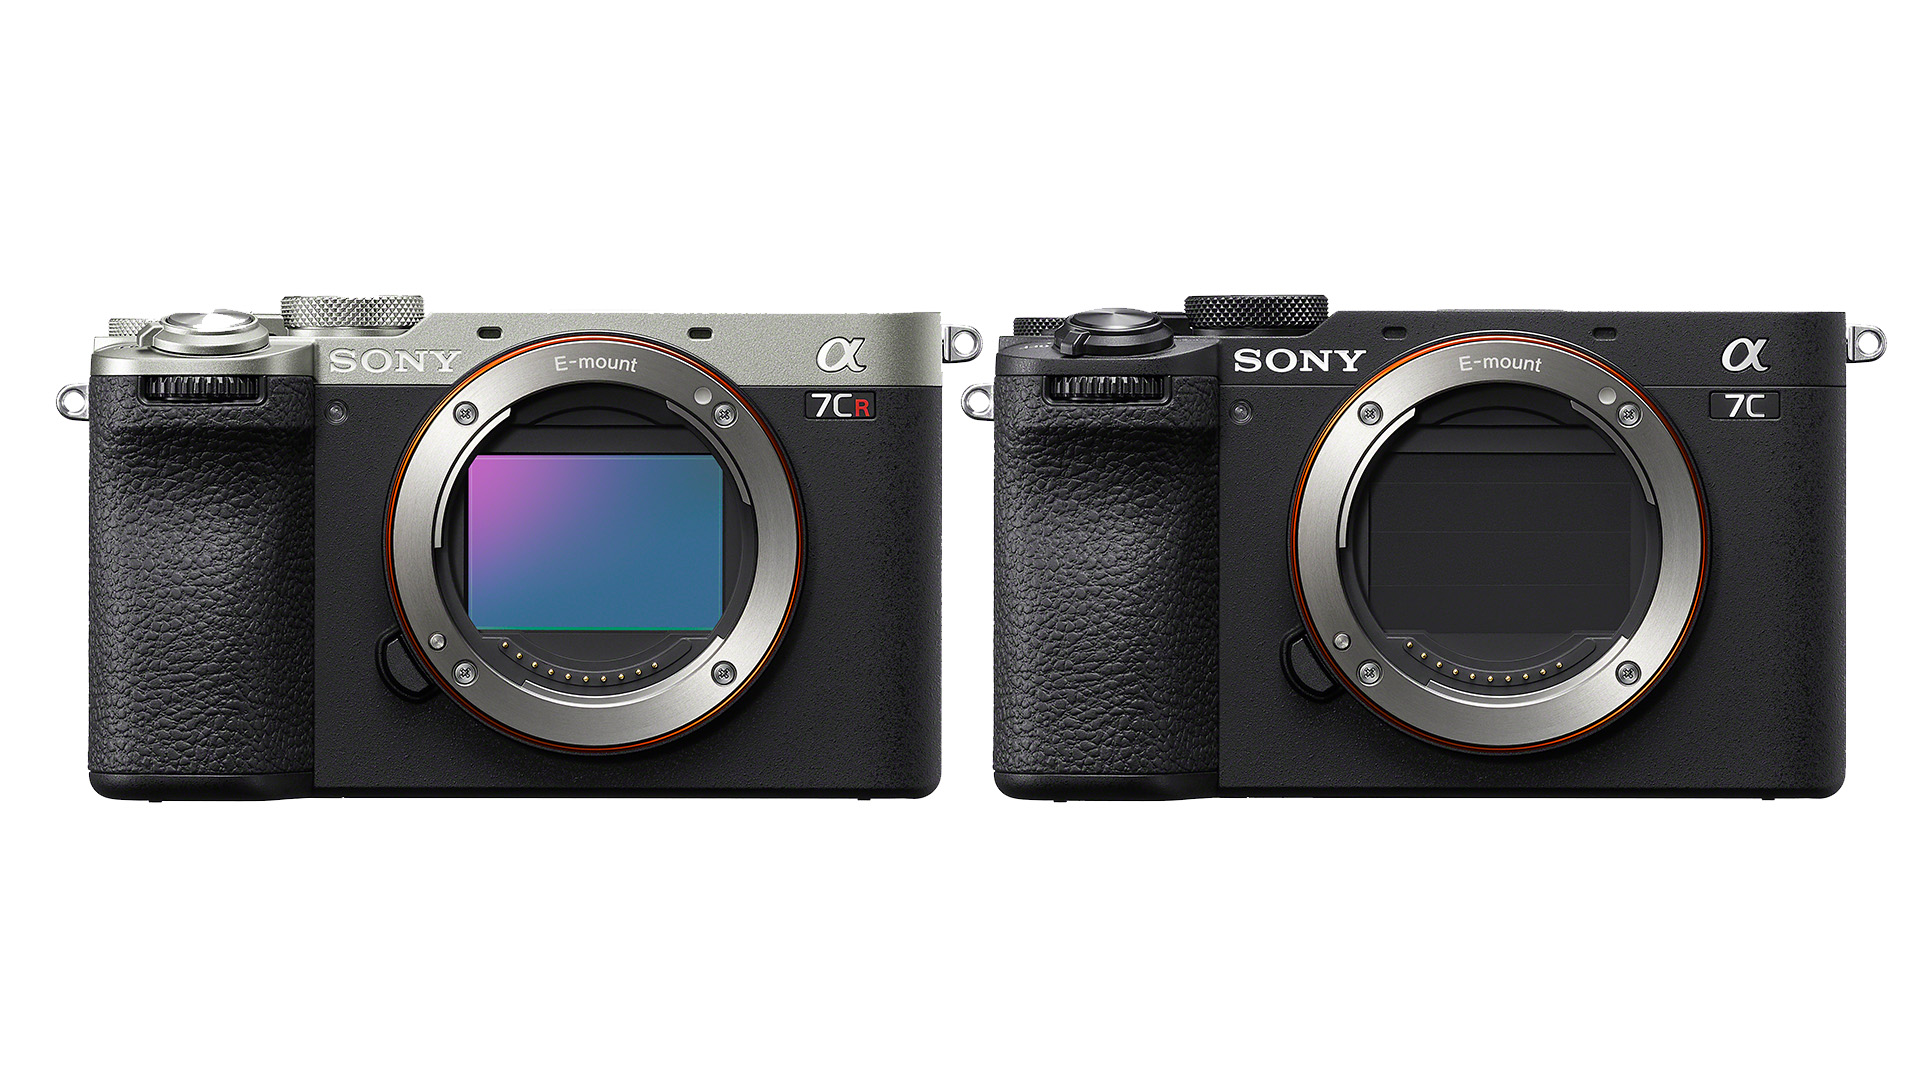 Sony Releases Alpha 7C R with 61MP & 7C II featuring latest still image &  video performance - Newsshooter